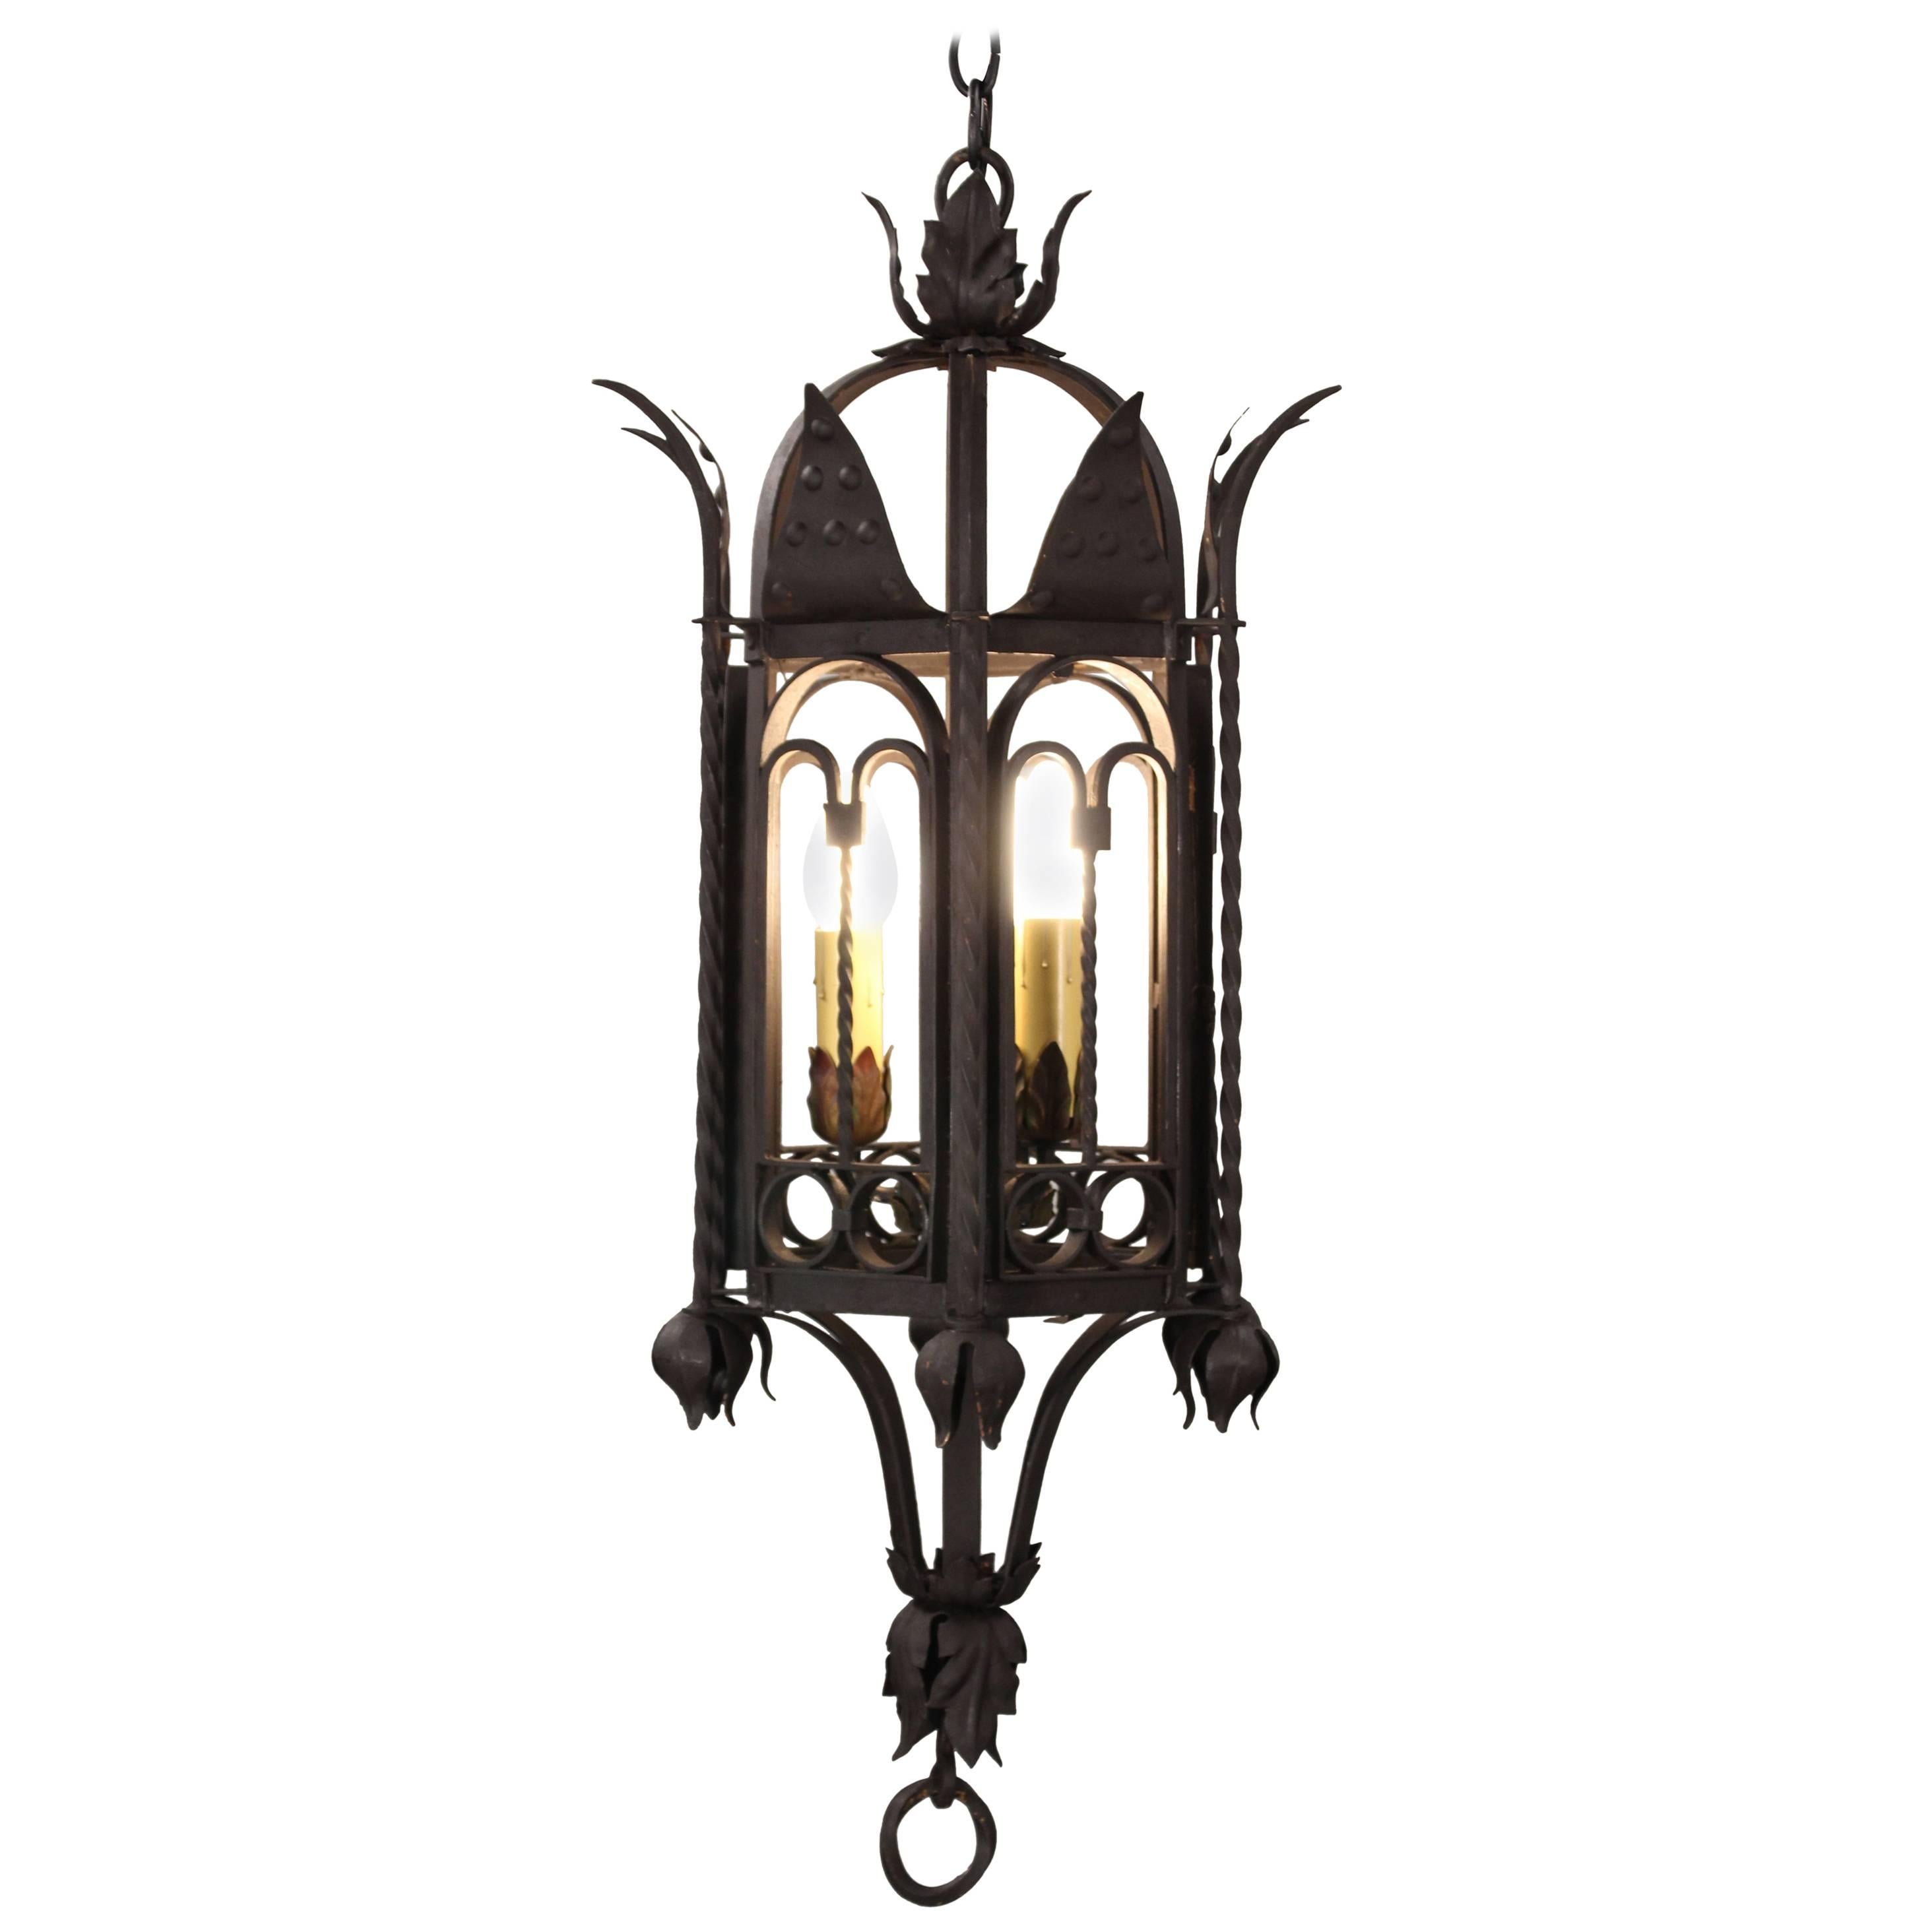 Classic 1920s Large-Scale Spanish Revival Chandelier